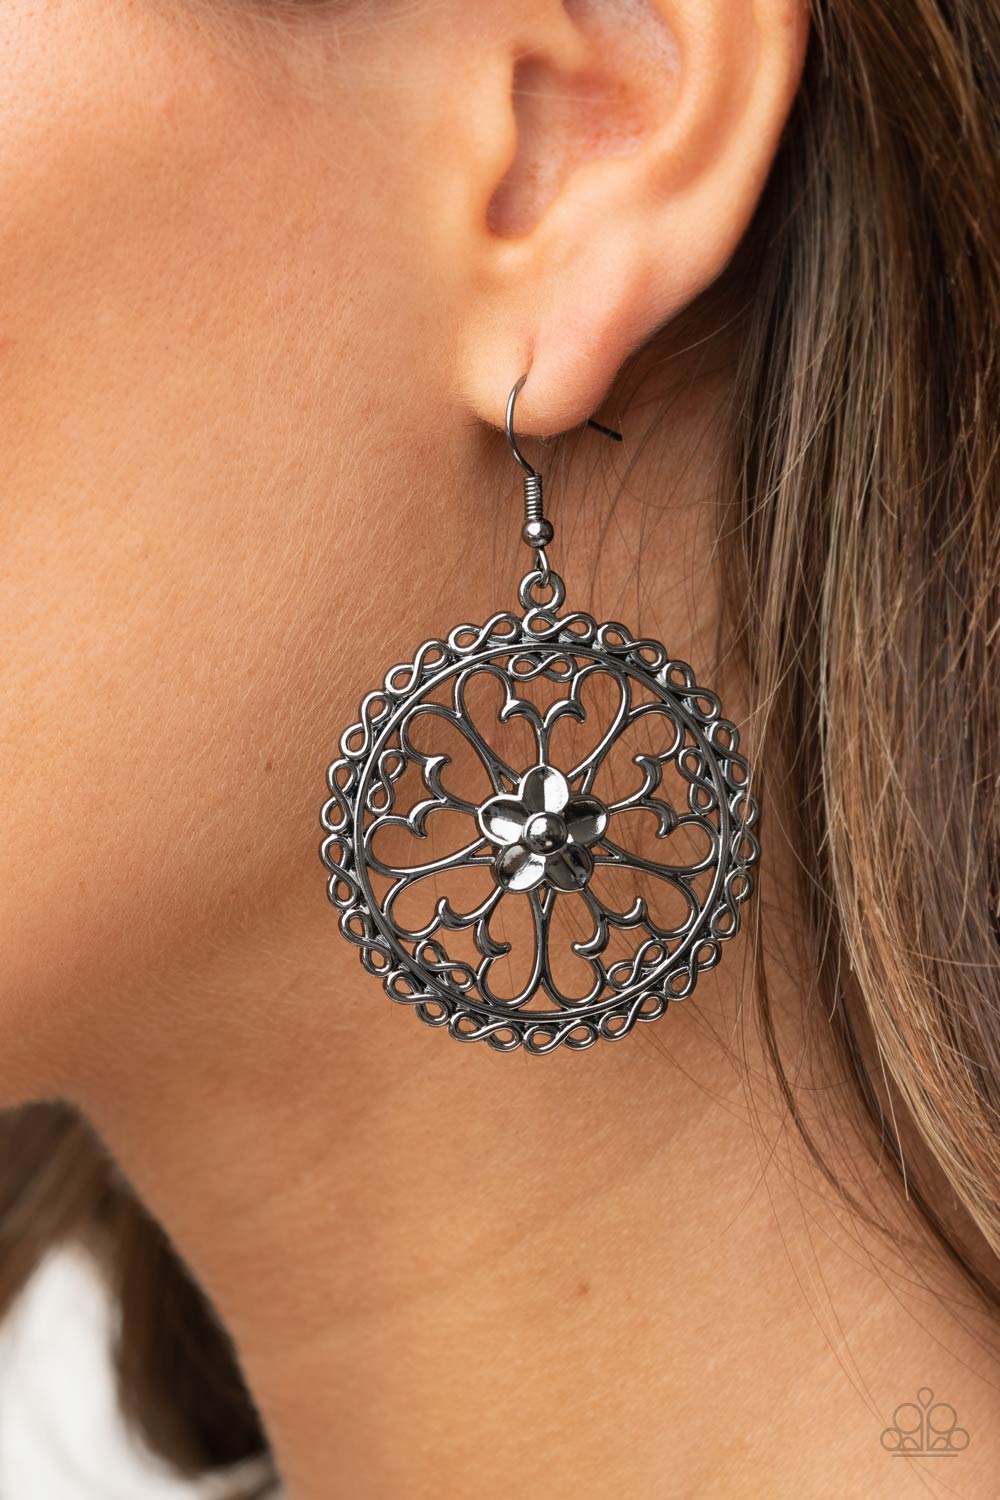 Floral Fortunes Black Floral Earrings Paparazzi Accessories. $5 Jewelry. Get Free Shipping.  